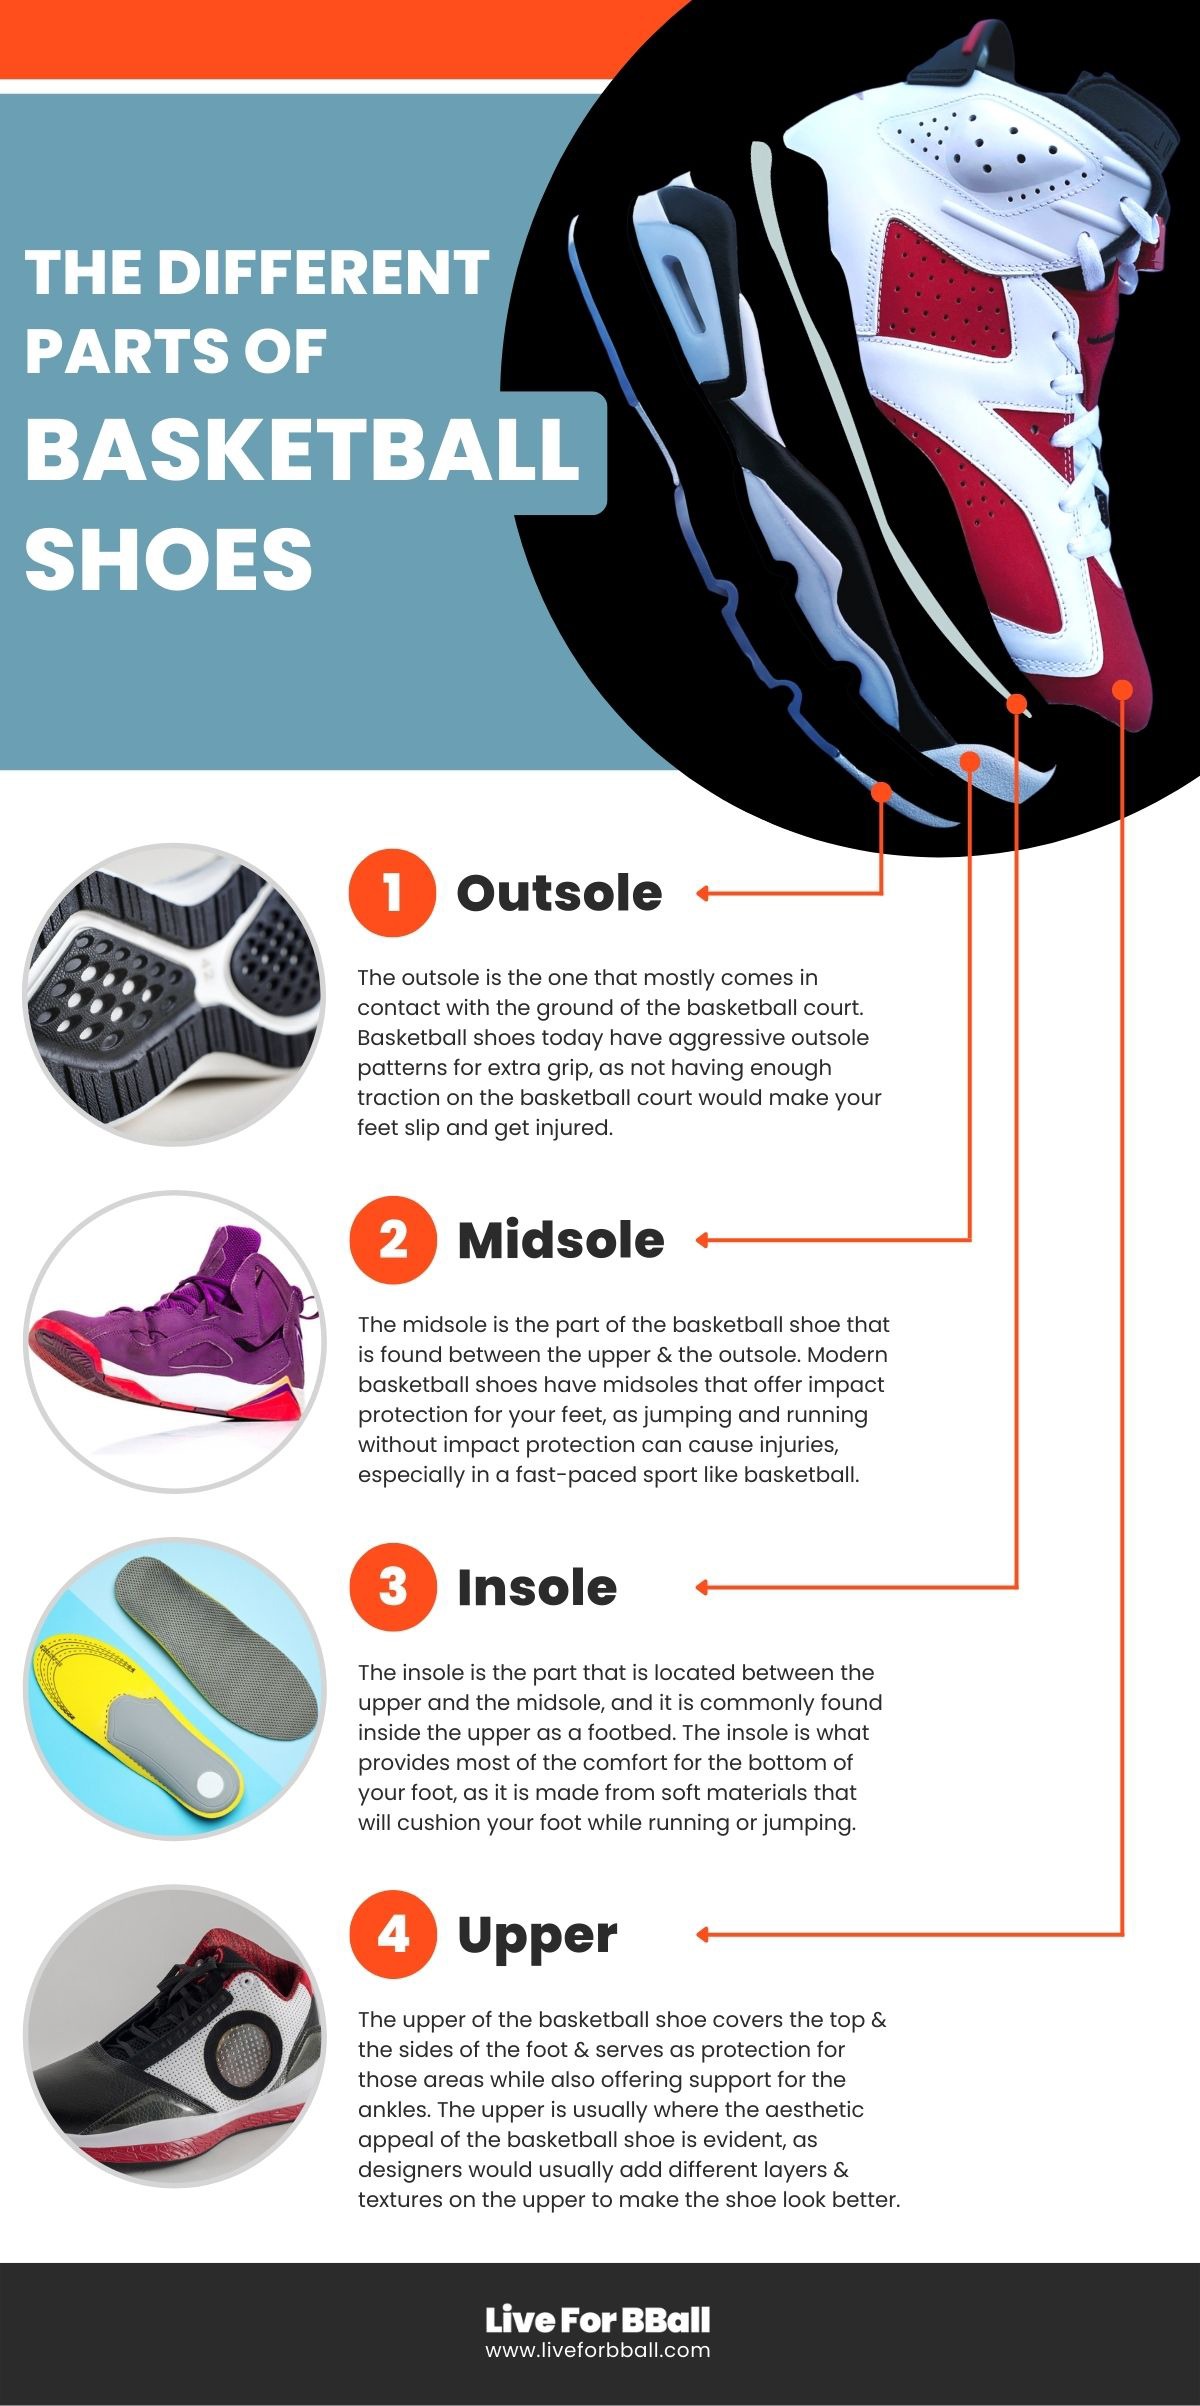 Basketball Shoes: What You Need to Know